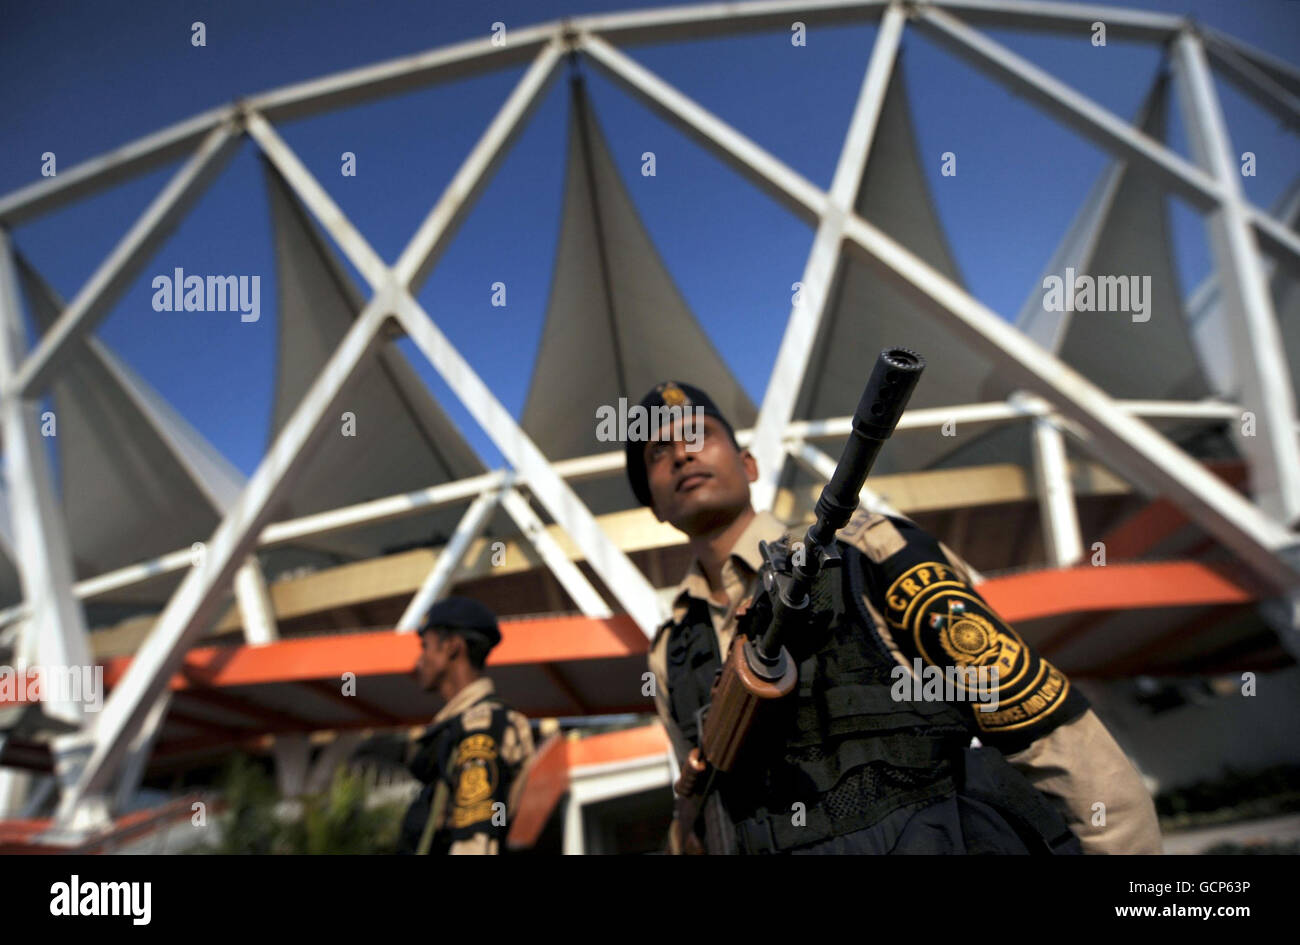 Armed guards patrol the Jawaharlal Nehru Stadium, in New Delhi, India, ahead of the 2010 Commonwealth Games opening ceremony. Stock Photo